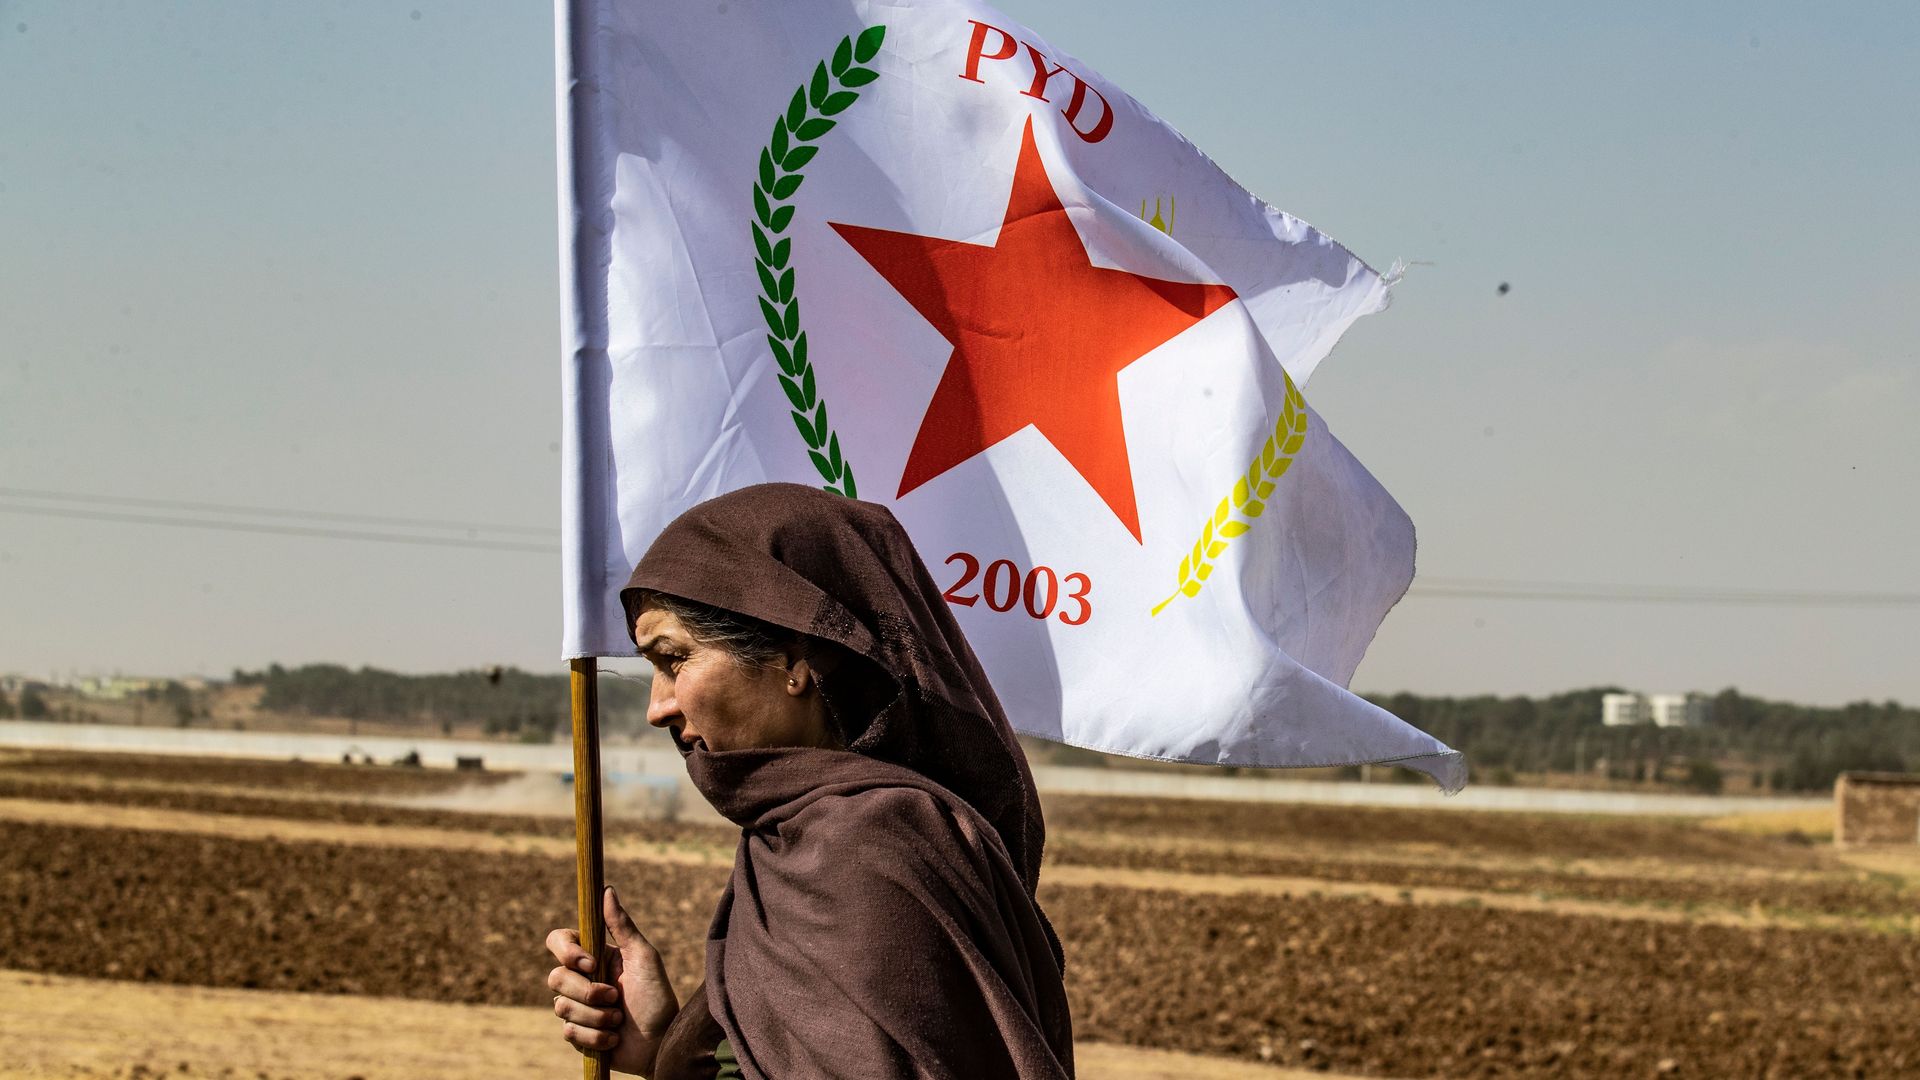 A Syrian Kurdish woman waves the flag of the Democratic Union Party during a demonstration against Turkish threats in Syria near the Turkish border.